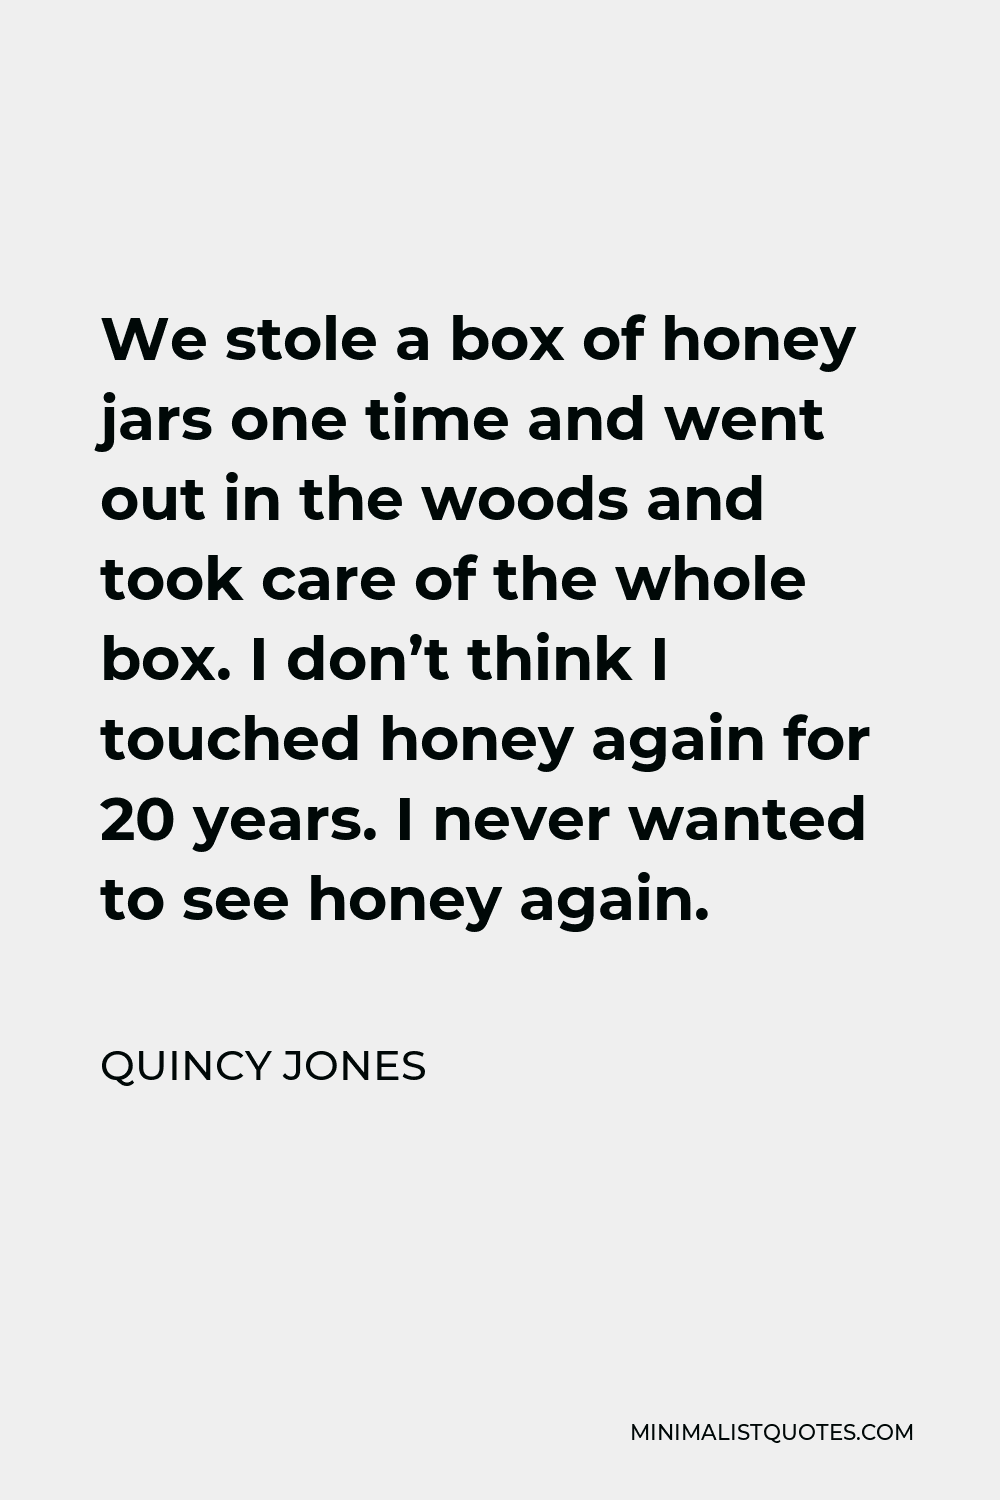 Quincy Jones Quote - We stole a box of honey jars one time and went out in the woods and took care of the whole box. I don’t think I touched honey again for 20 years. I never wanted to see honey again.